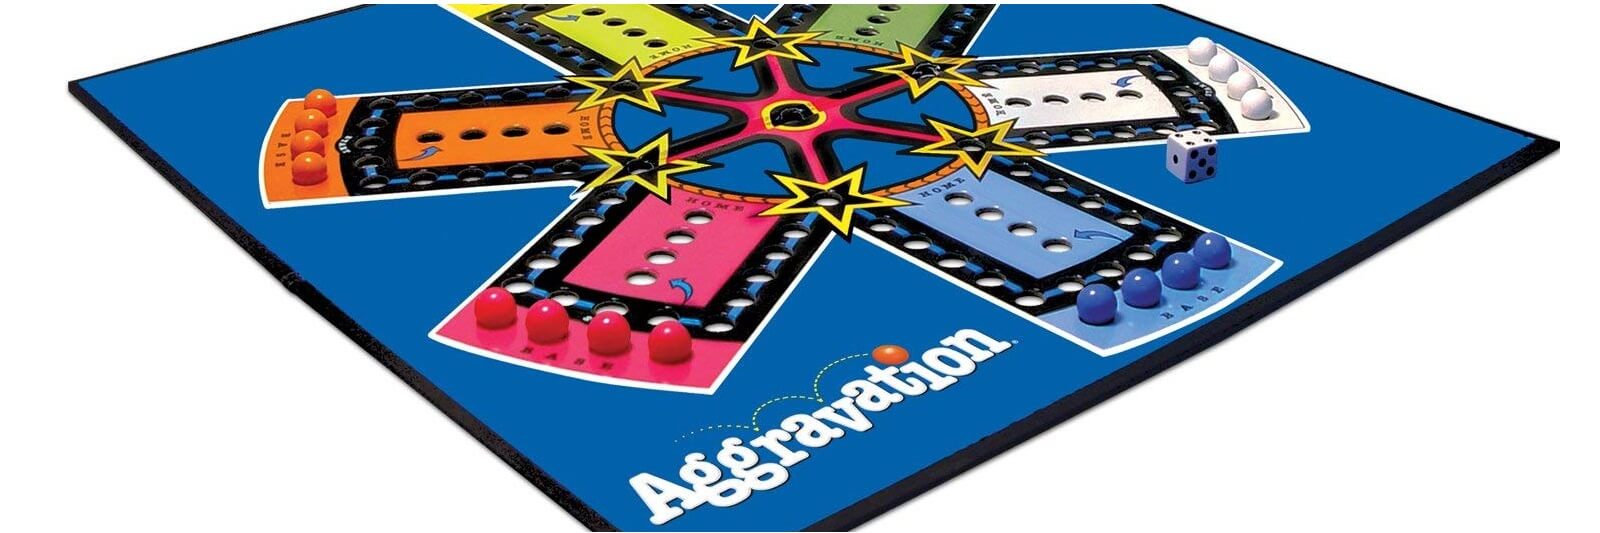 aggravation-board-game-review-rules-instructions